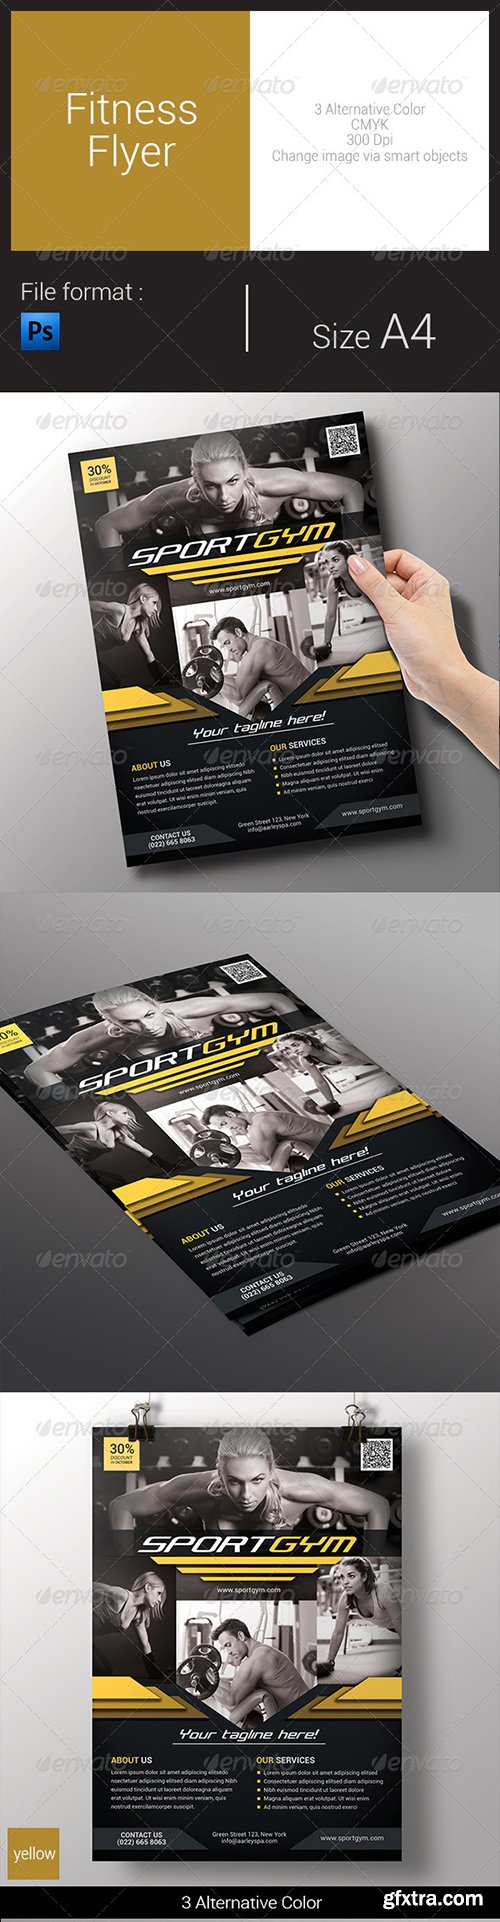 Graphicriver - Fitness Flyer 8558472